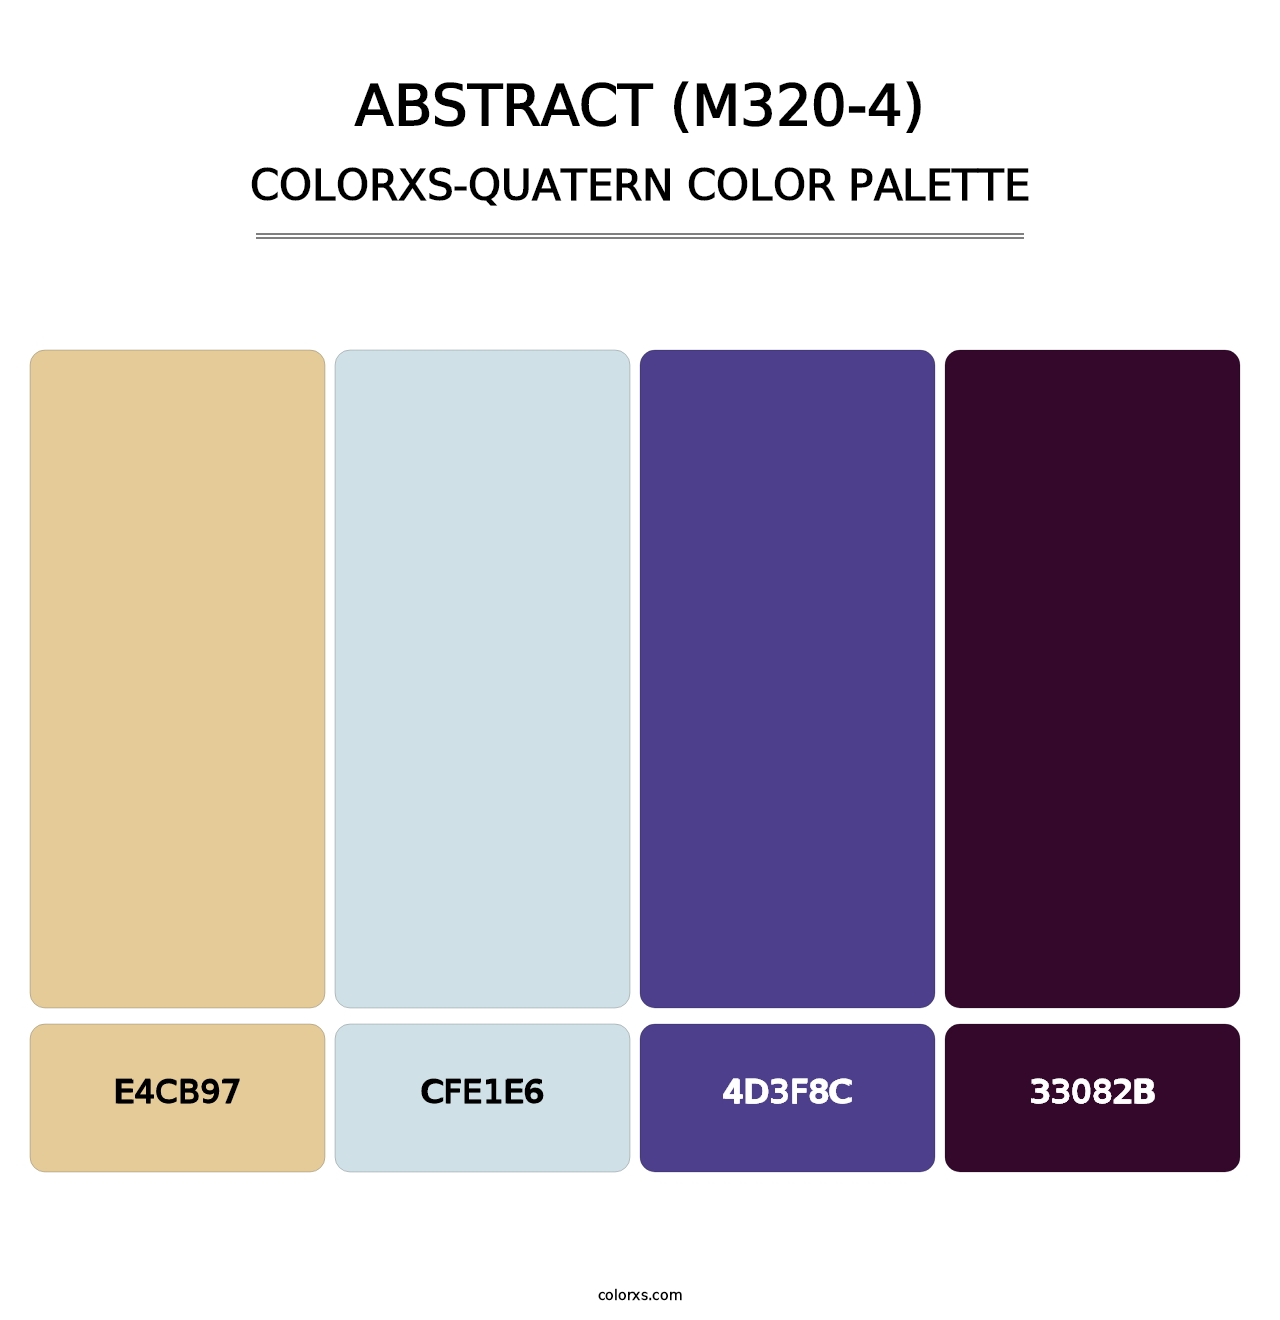 Abstract (M320-4) - Colorxs Quatern Palette